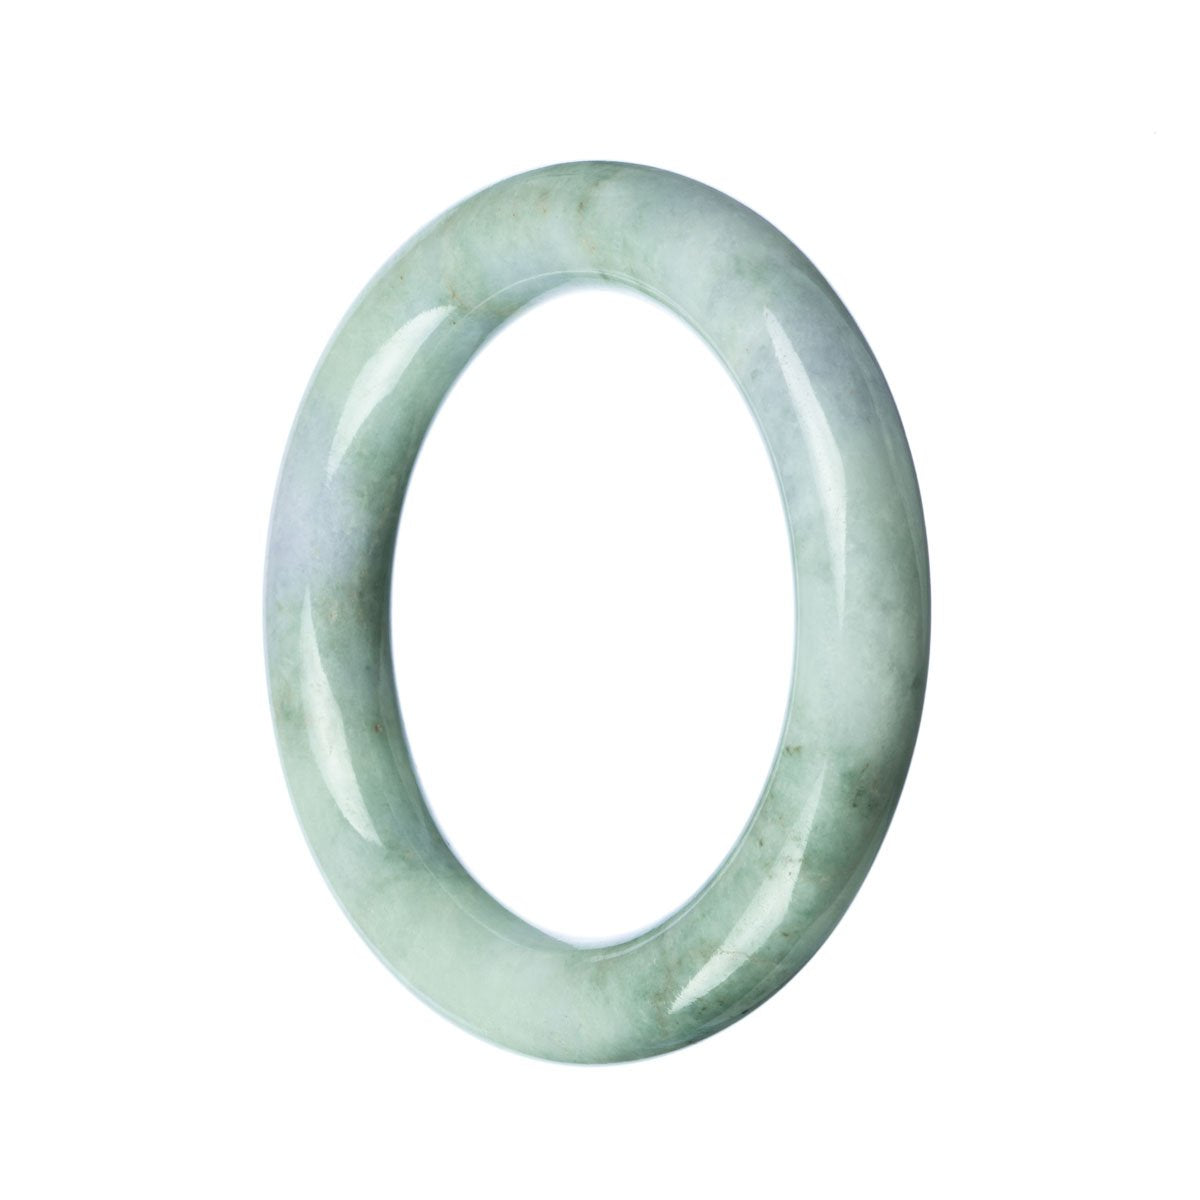 A round 58mm jade bangle bracelet in a pale green color, untreated and made from genuine traditional jade.